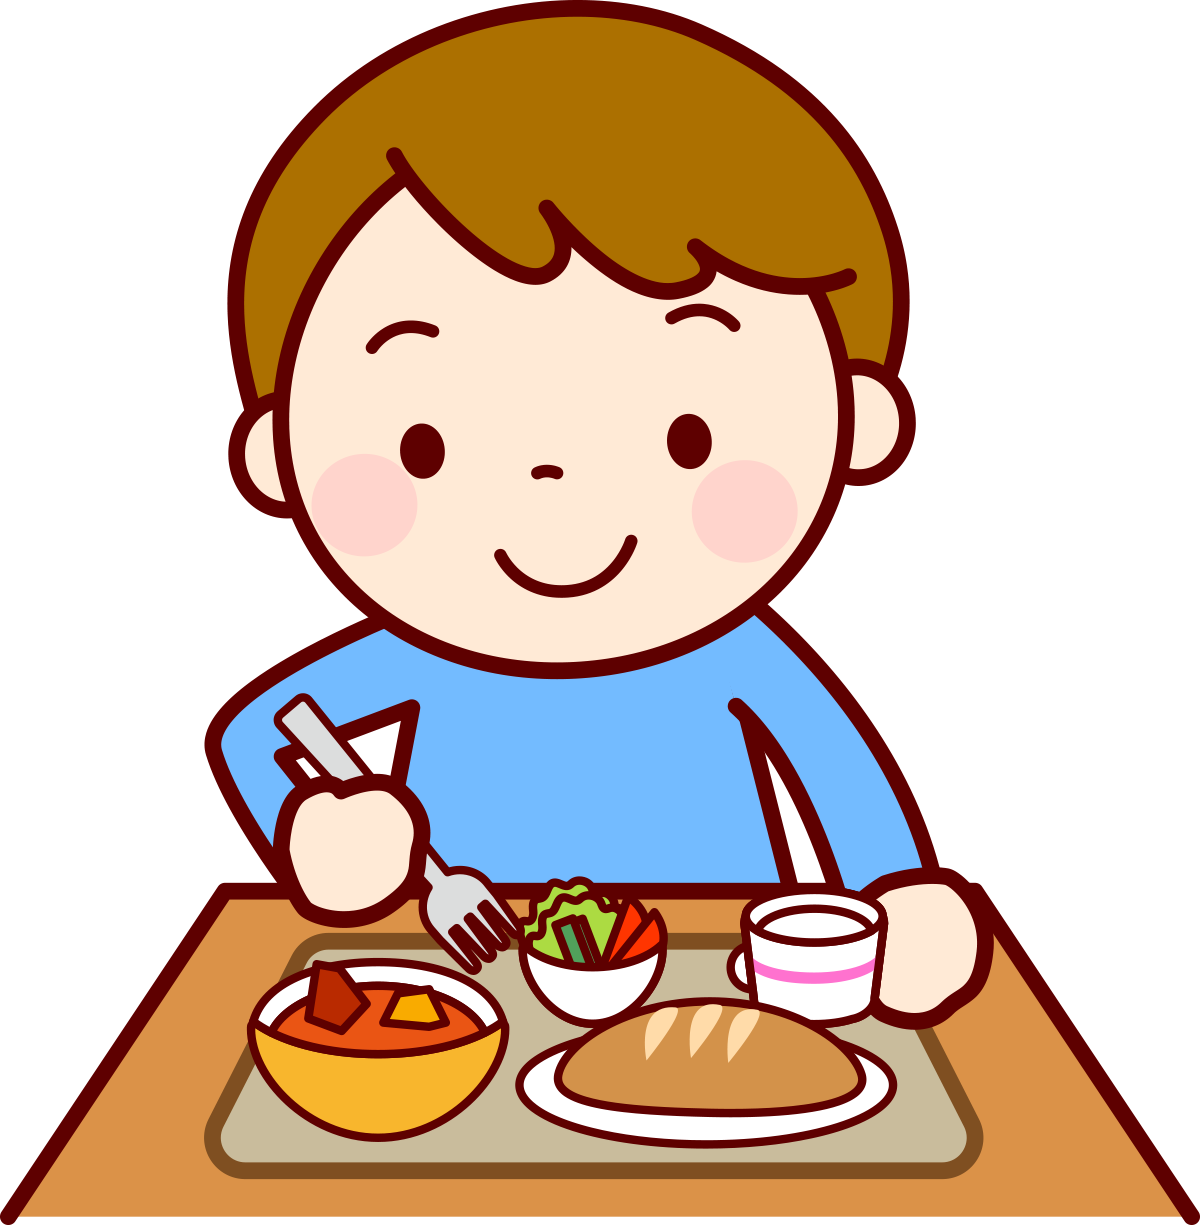 Breakfast Lunch & Dinner Clipart / Collage clipart breakfast lunch ...